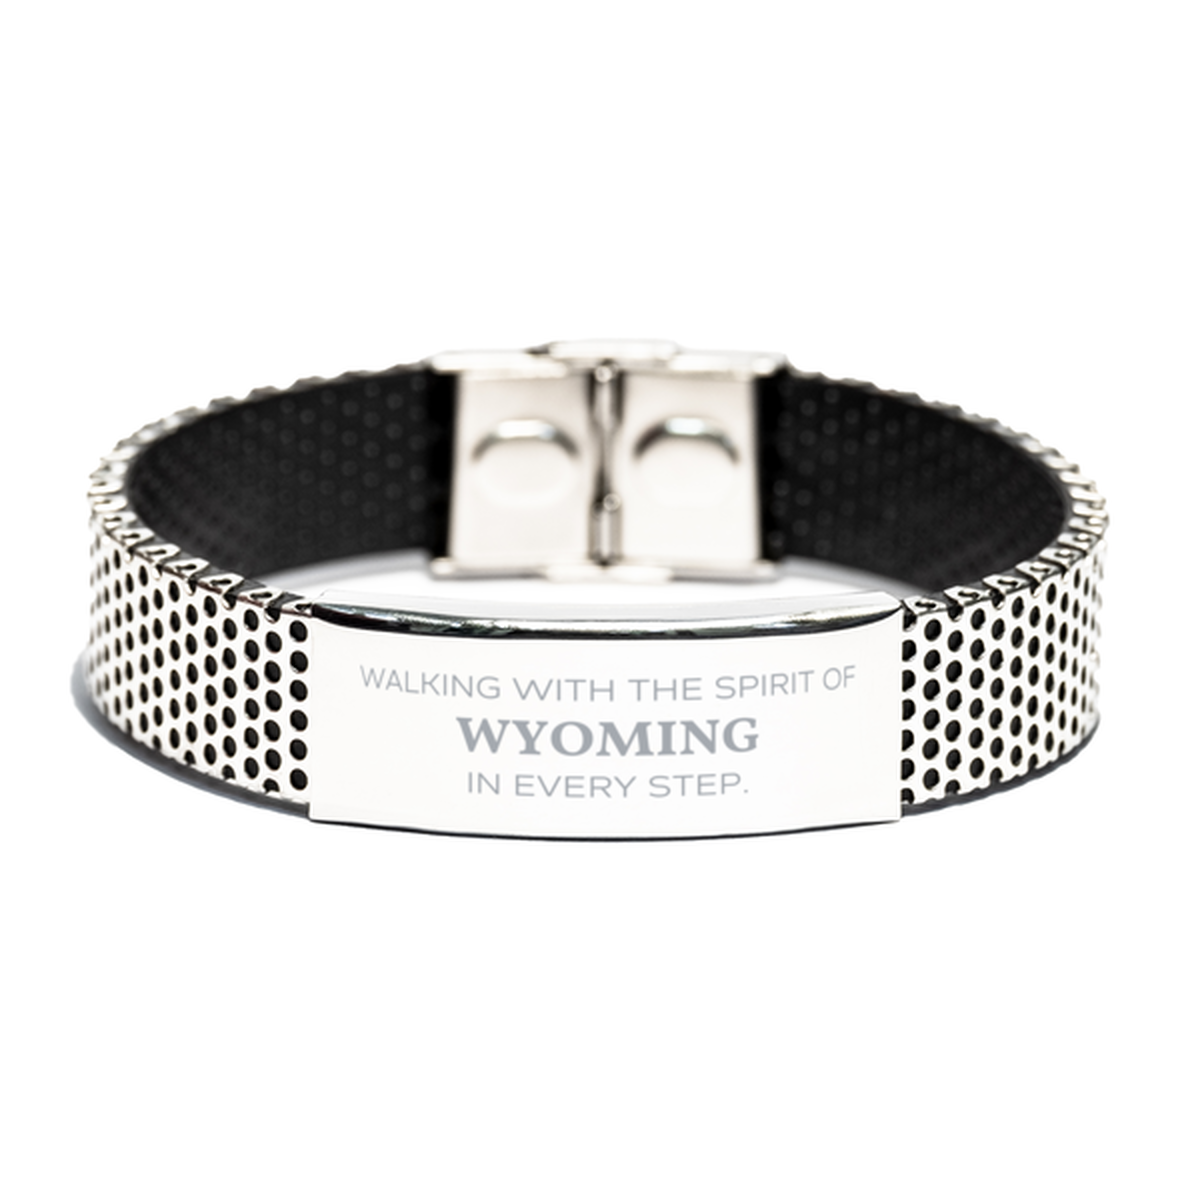 Wyoming Gifts, Walking with the spirit, Love Wyoming Birthday Christmas Stainless Steel Bracelet For Wyoming People, Men, Women, Friends